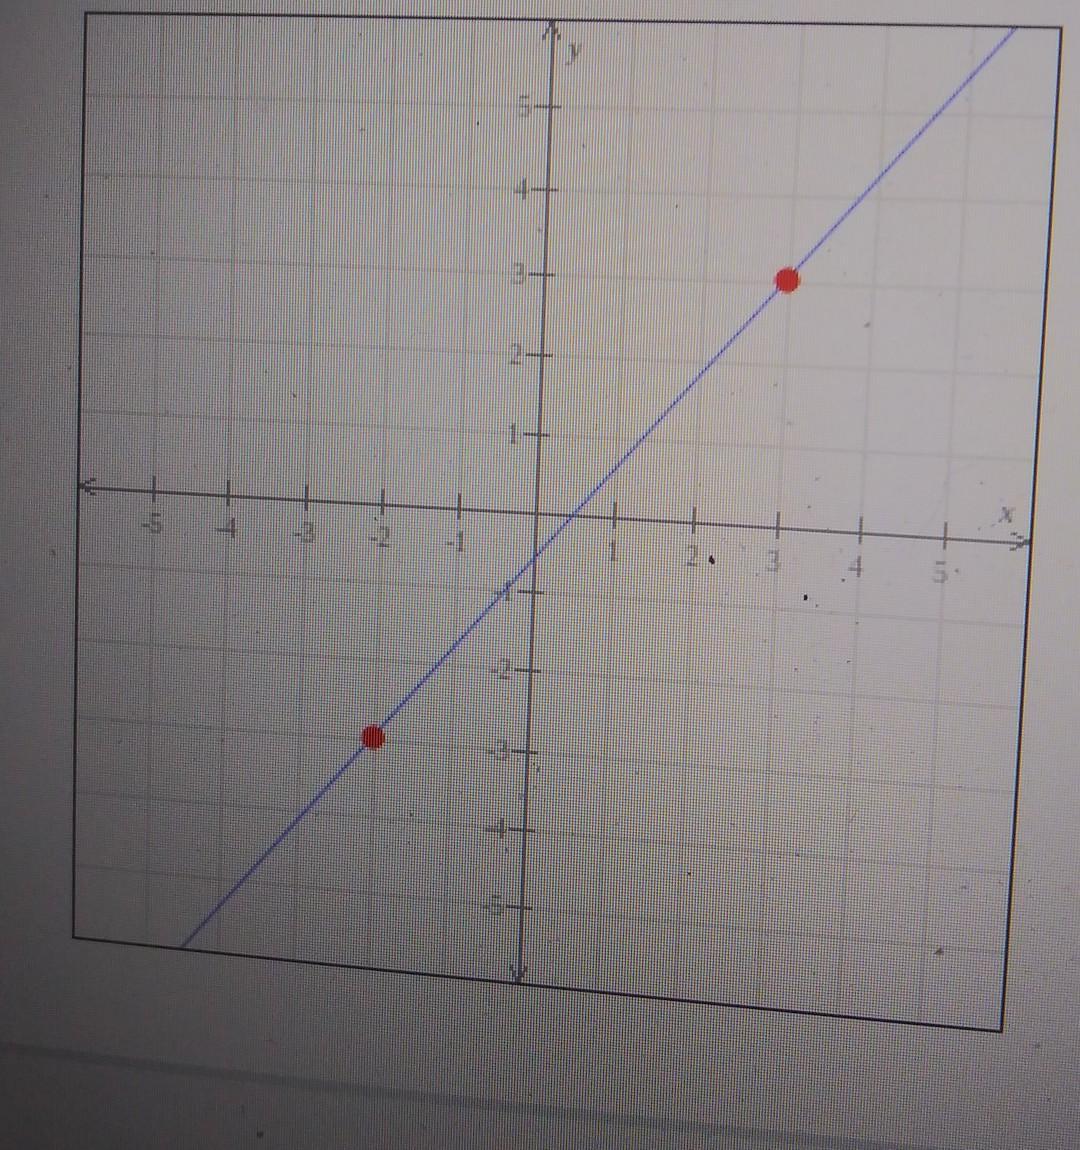 Find The Slope Of The Line Graphed Below. 